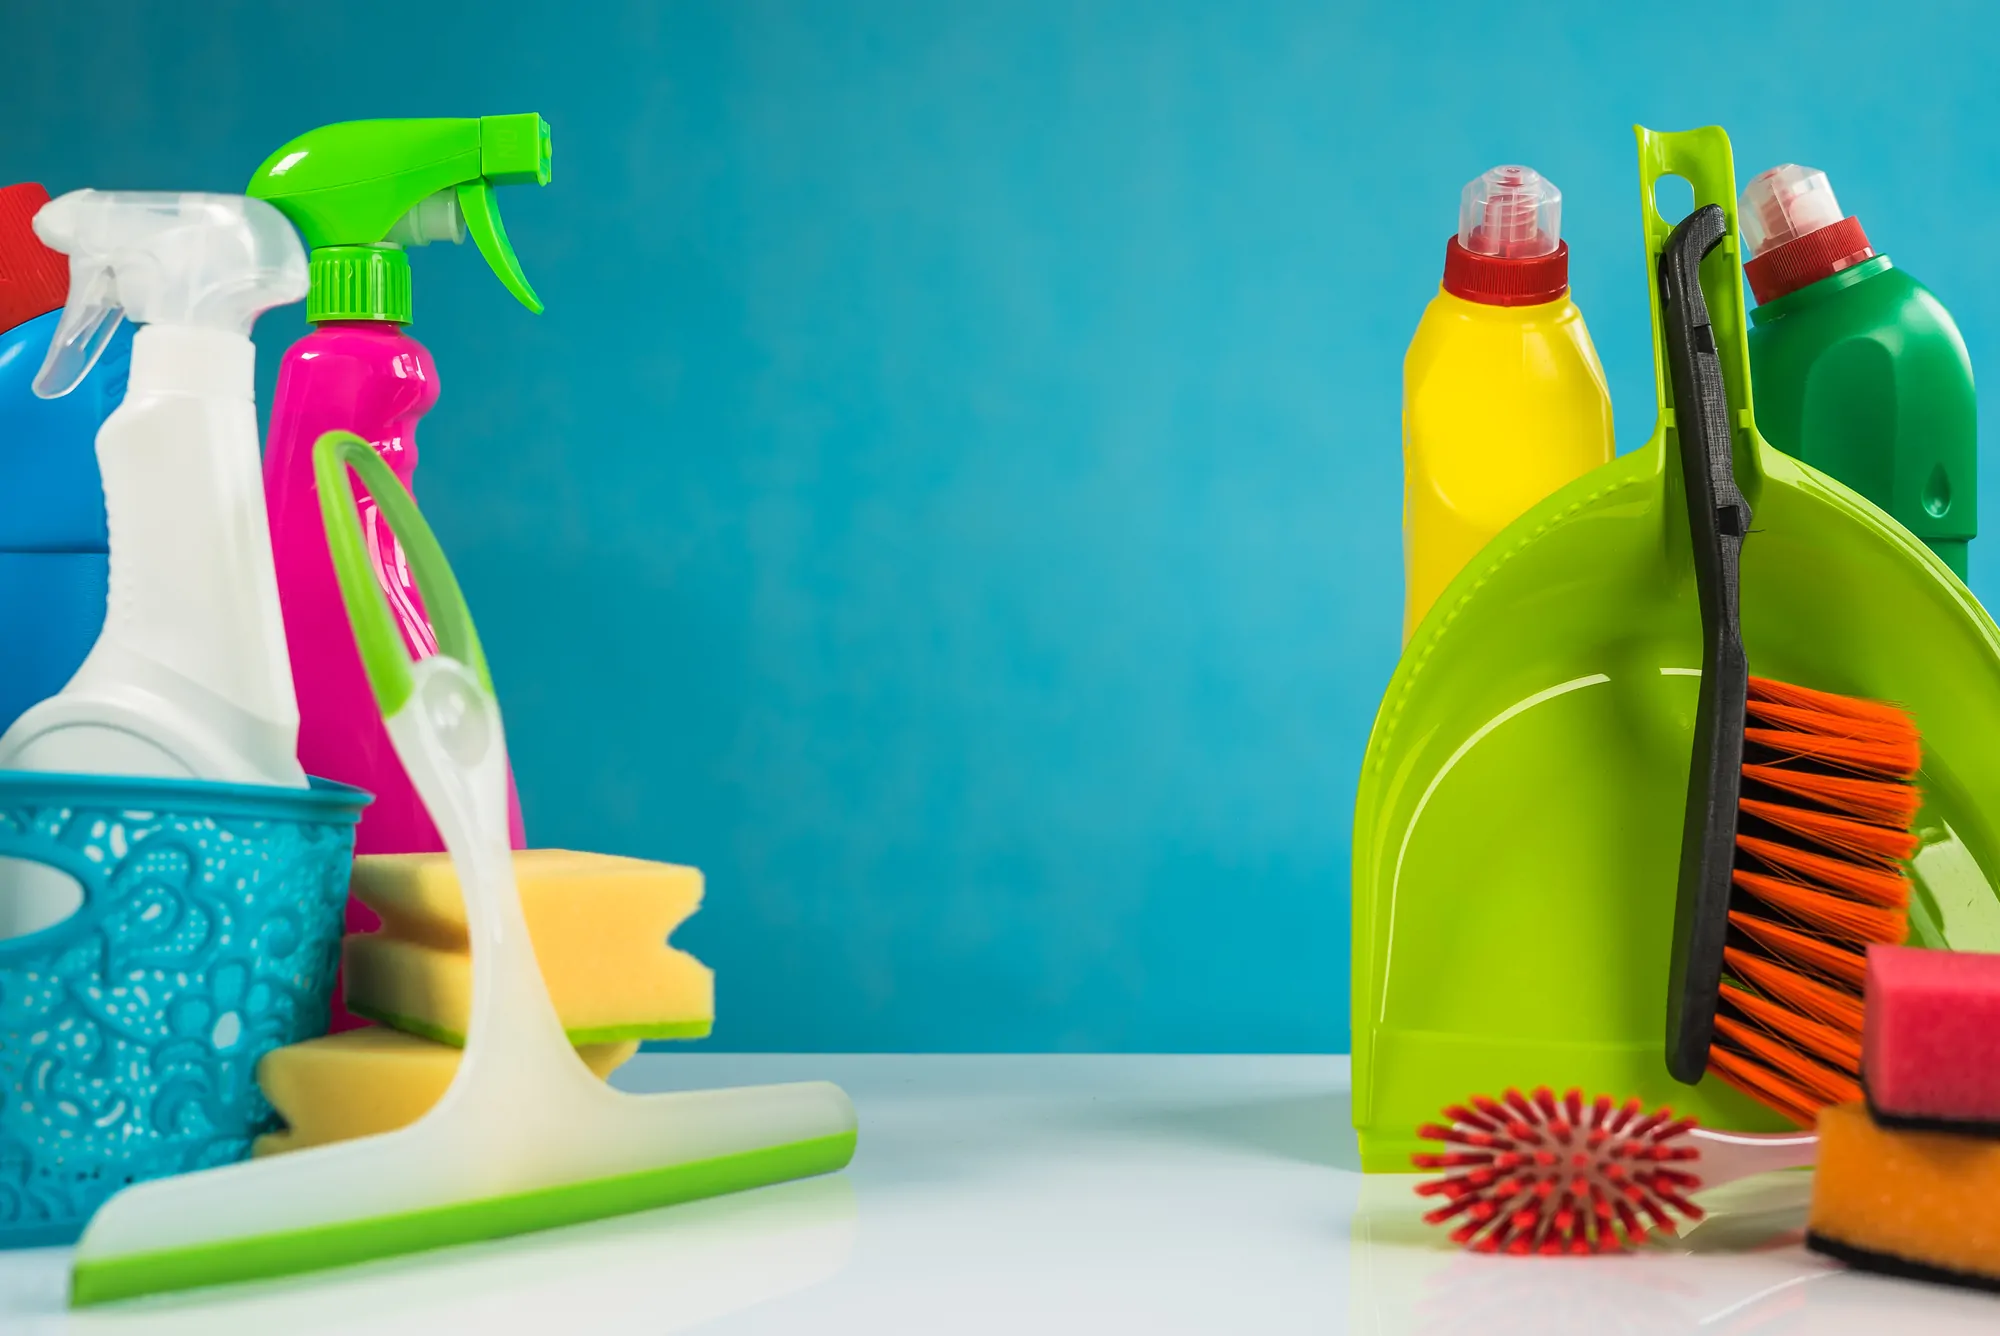 cleaning products against a blue background